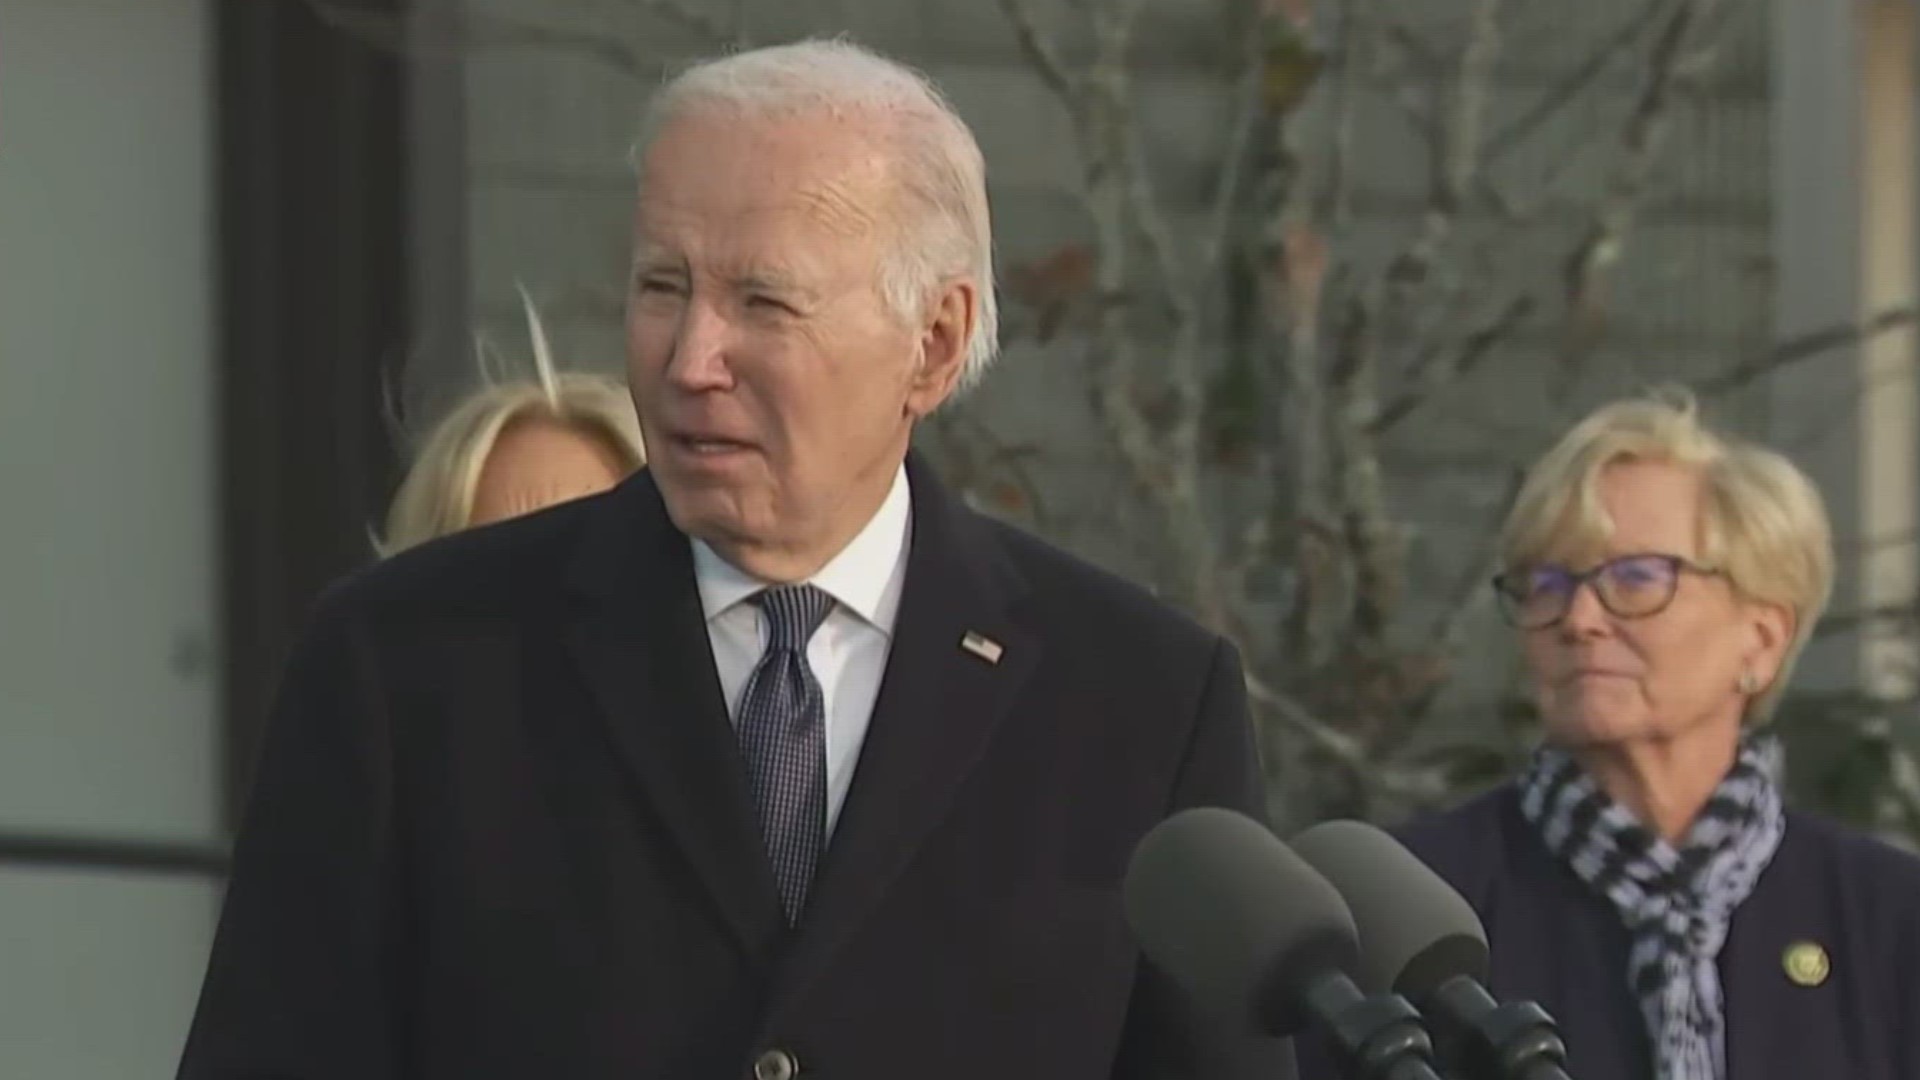 Biden said he wanted to remind the community of this: "You're not alone."